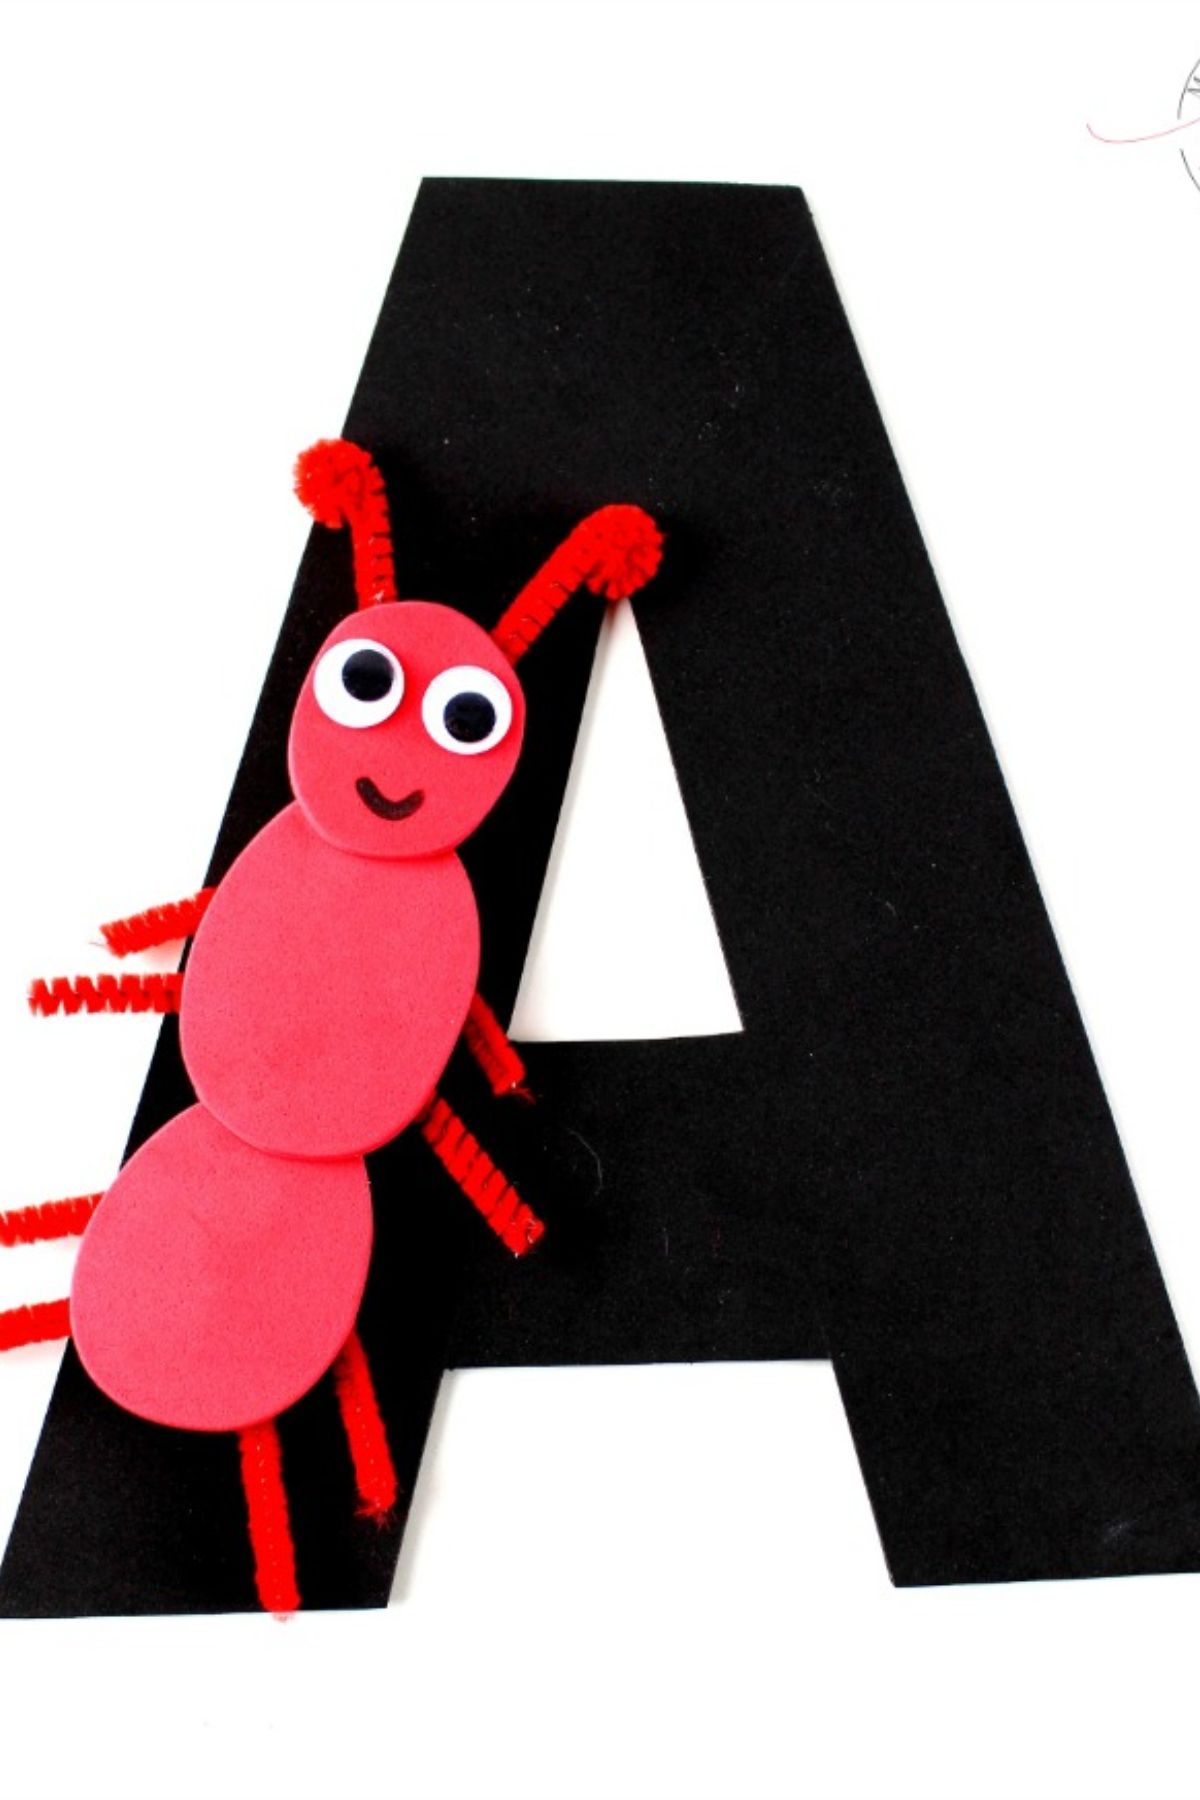 uppercase letter A craft